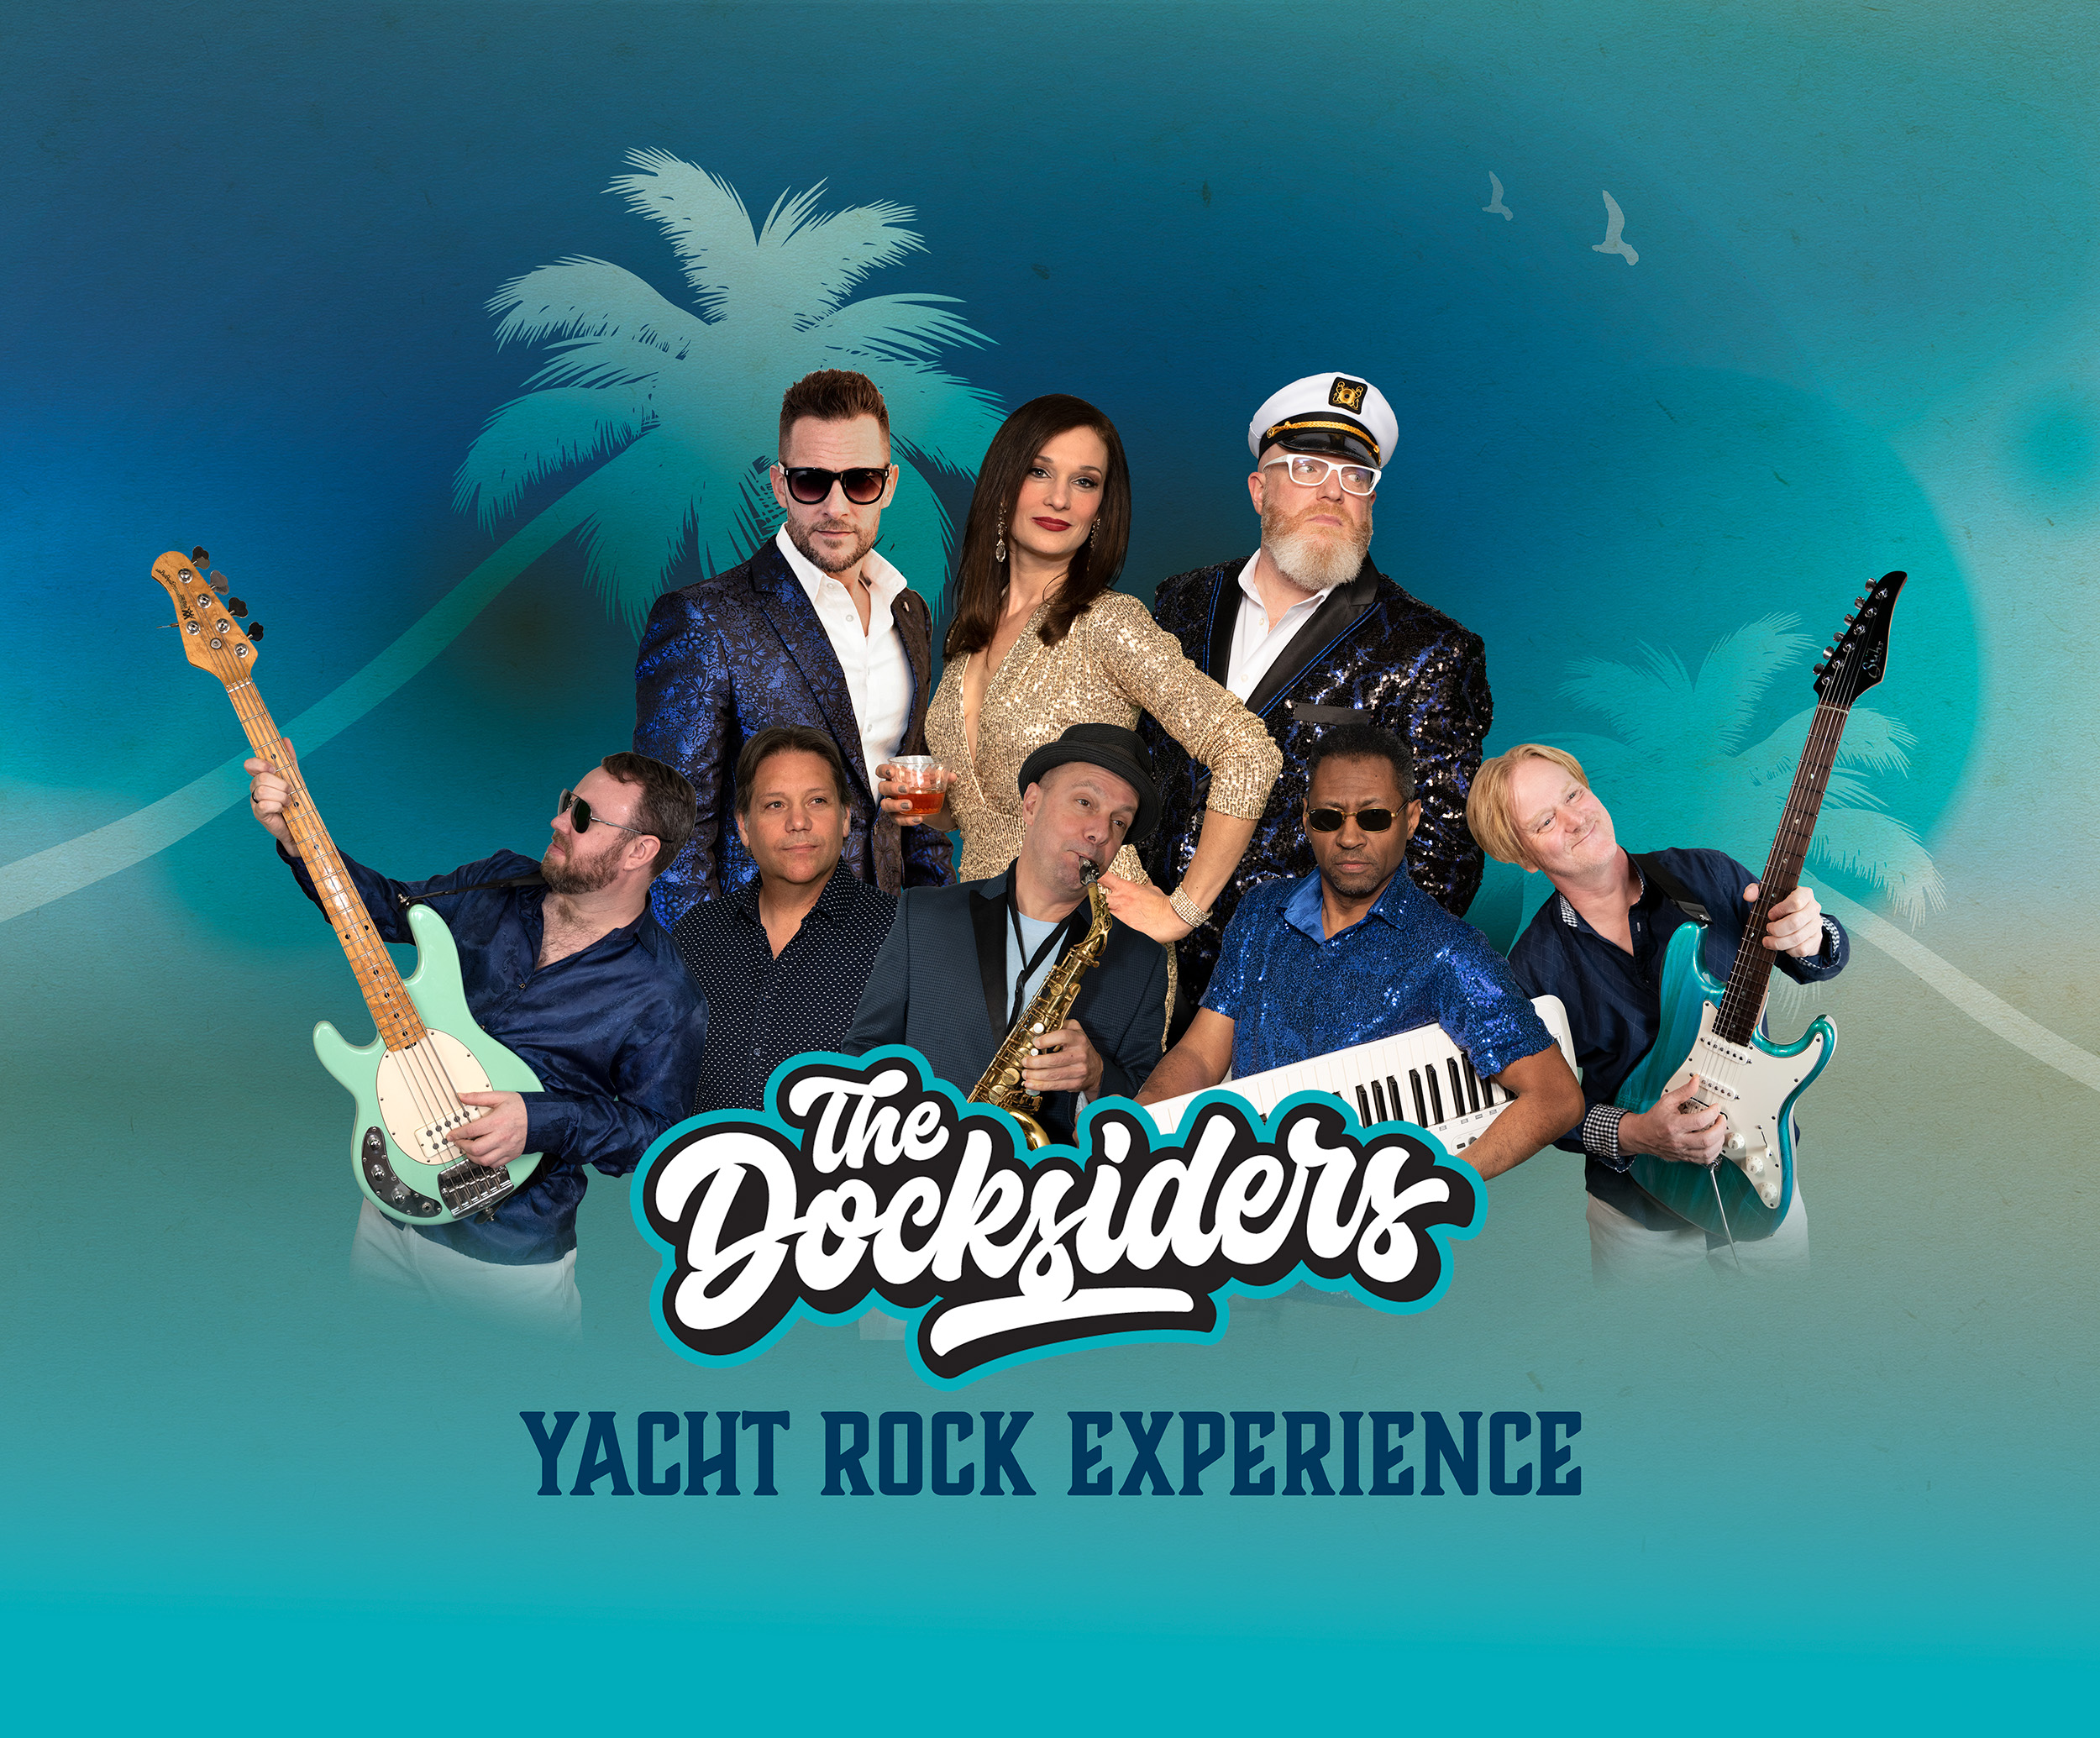 America's Favorite Yacht Rock Band - The Docksiders